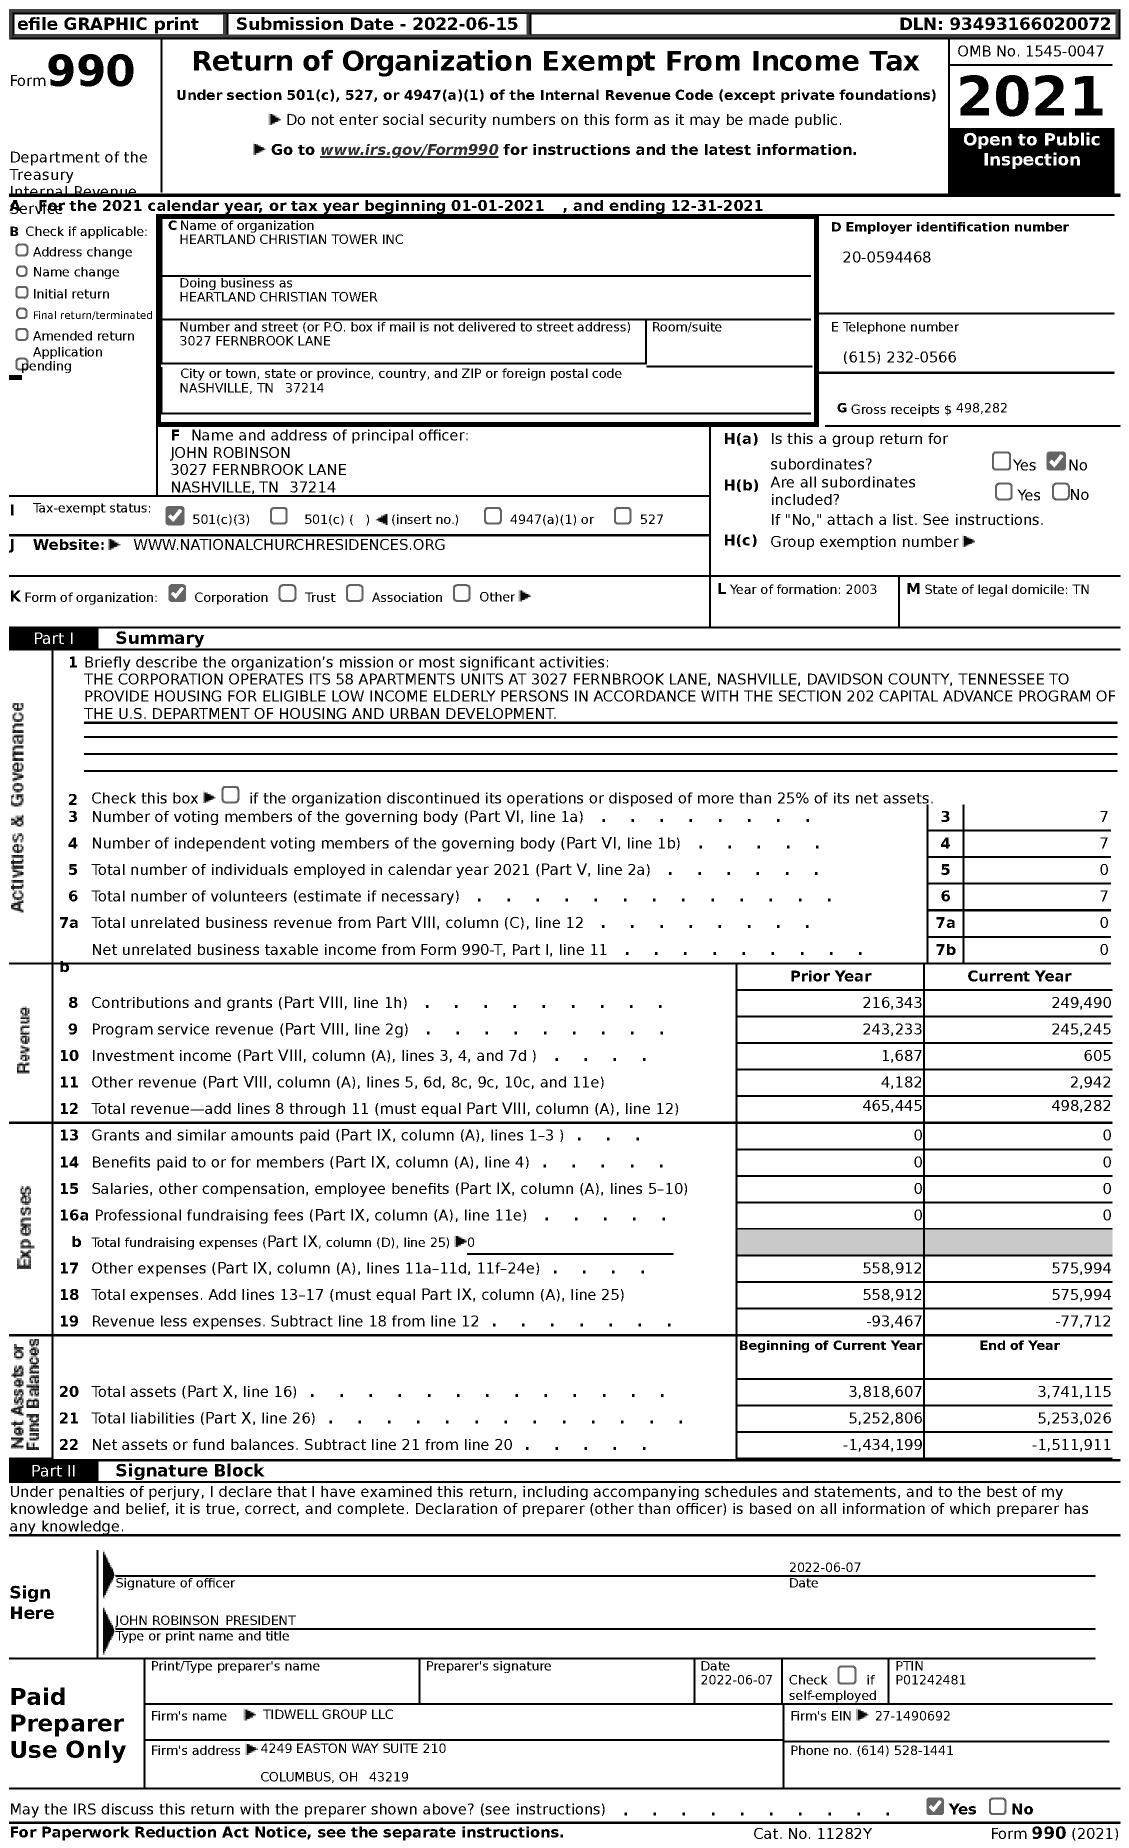 Image of first page of 2021 Form 990 for Heartland Christian Tower